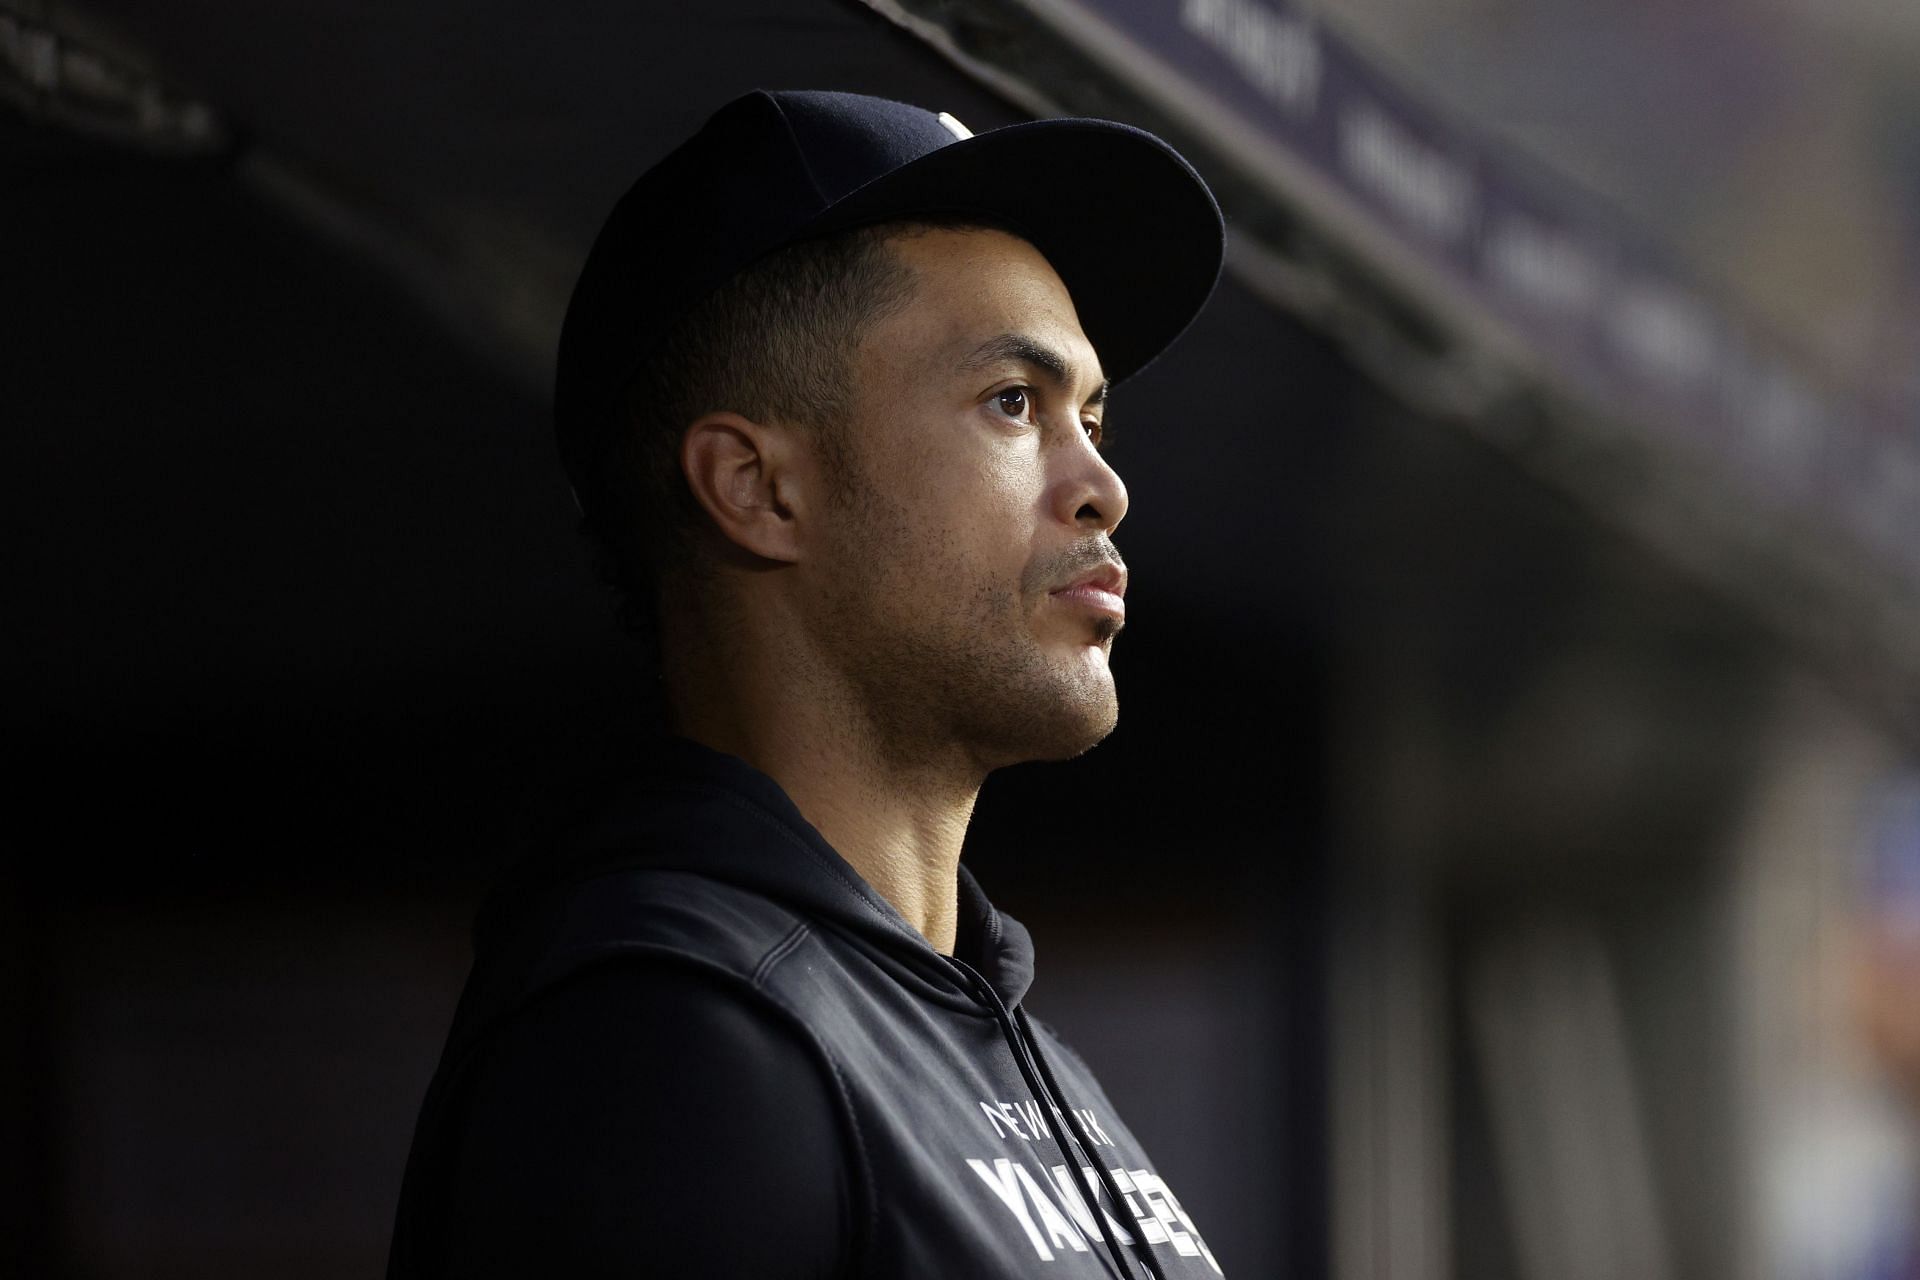 Yankees' Stanton goes on 10-day IL with Achilles tendinitis